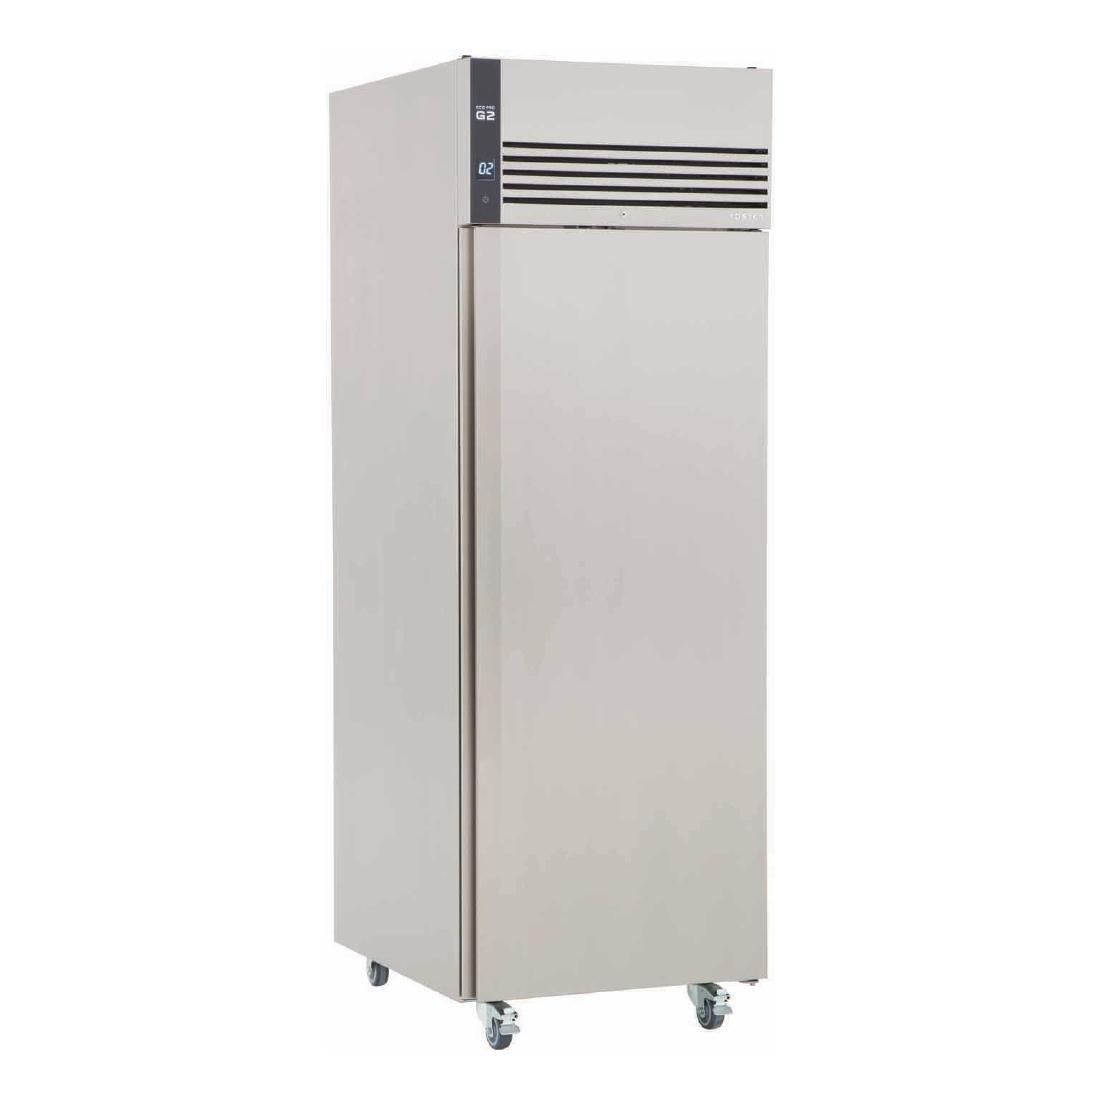 Foster EcoPro G2 1 Door 600Ltr Cabinet Fridge with Back EP700H 10/115